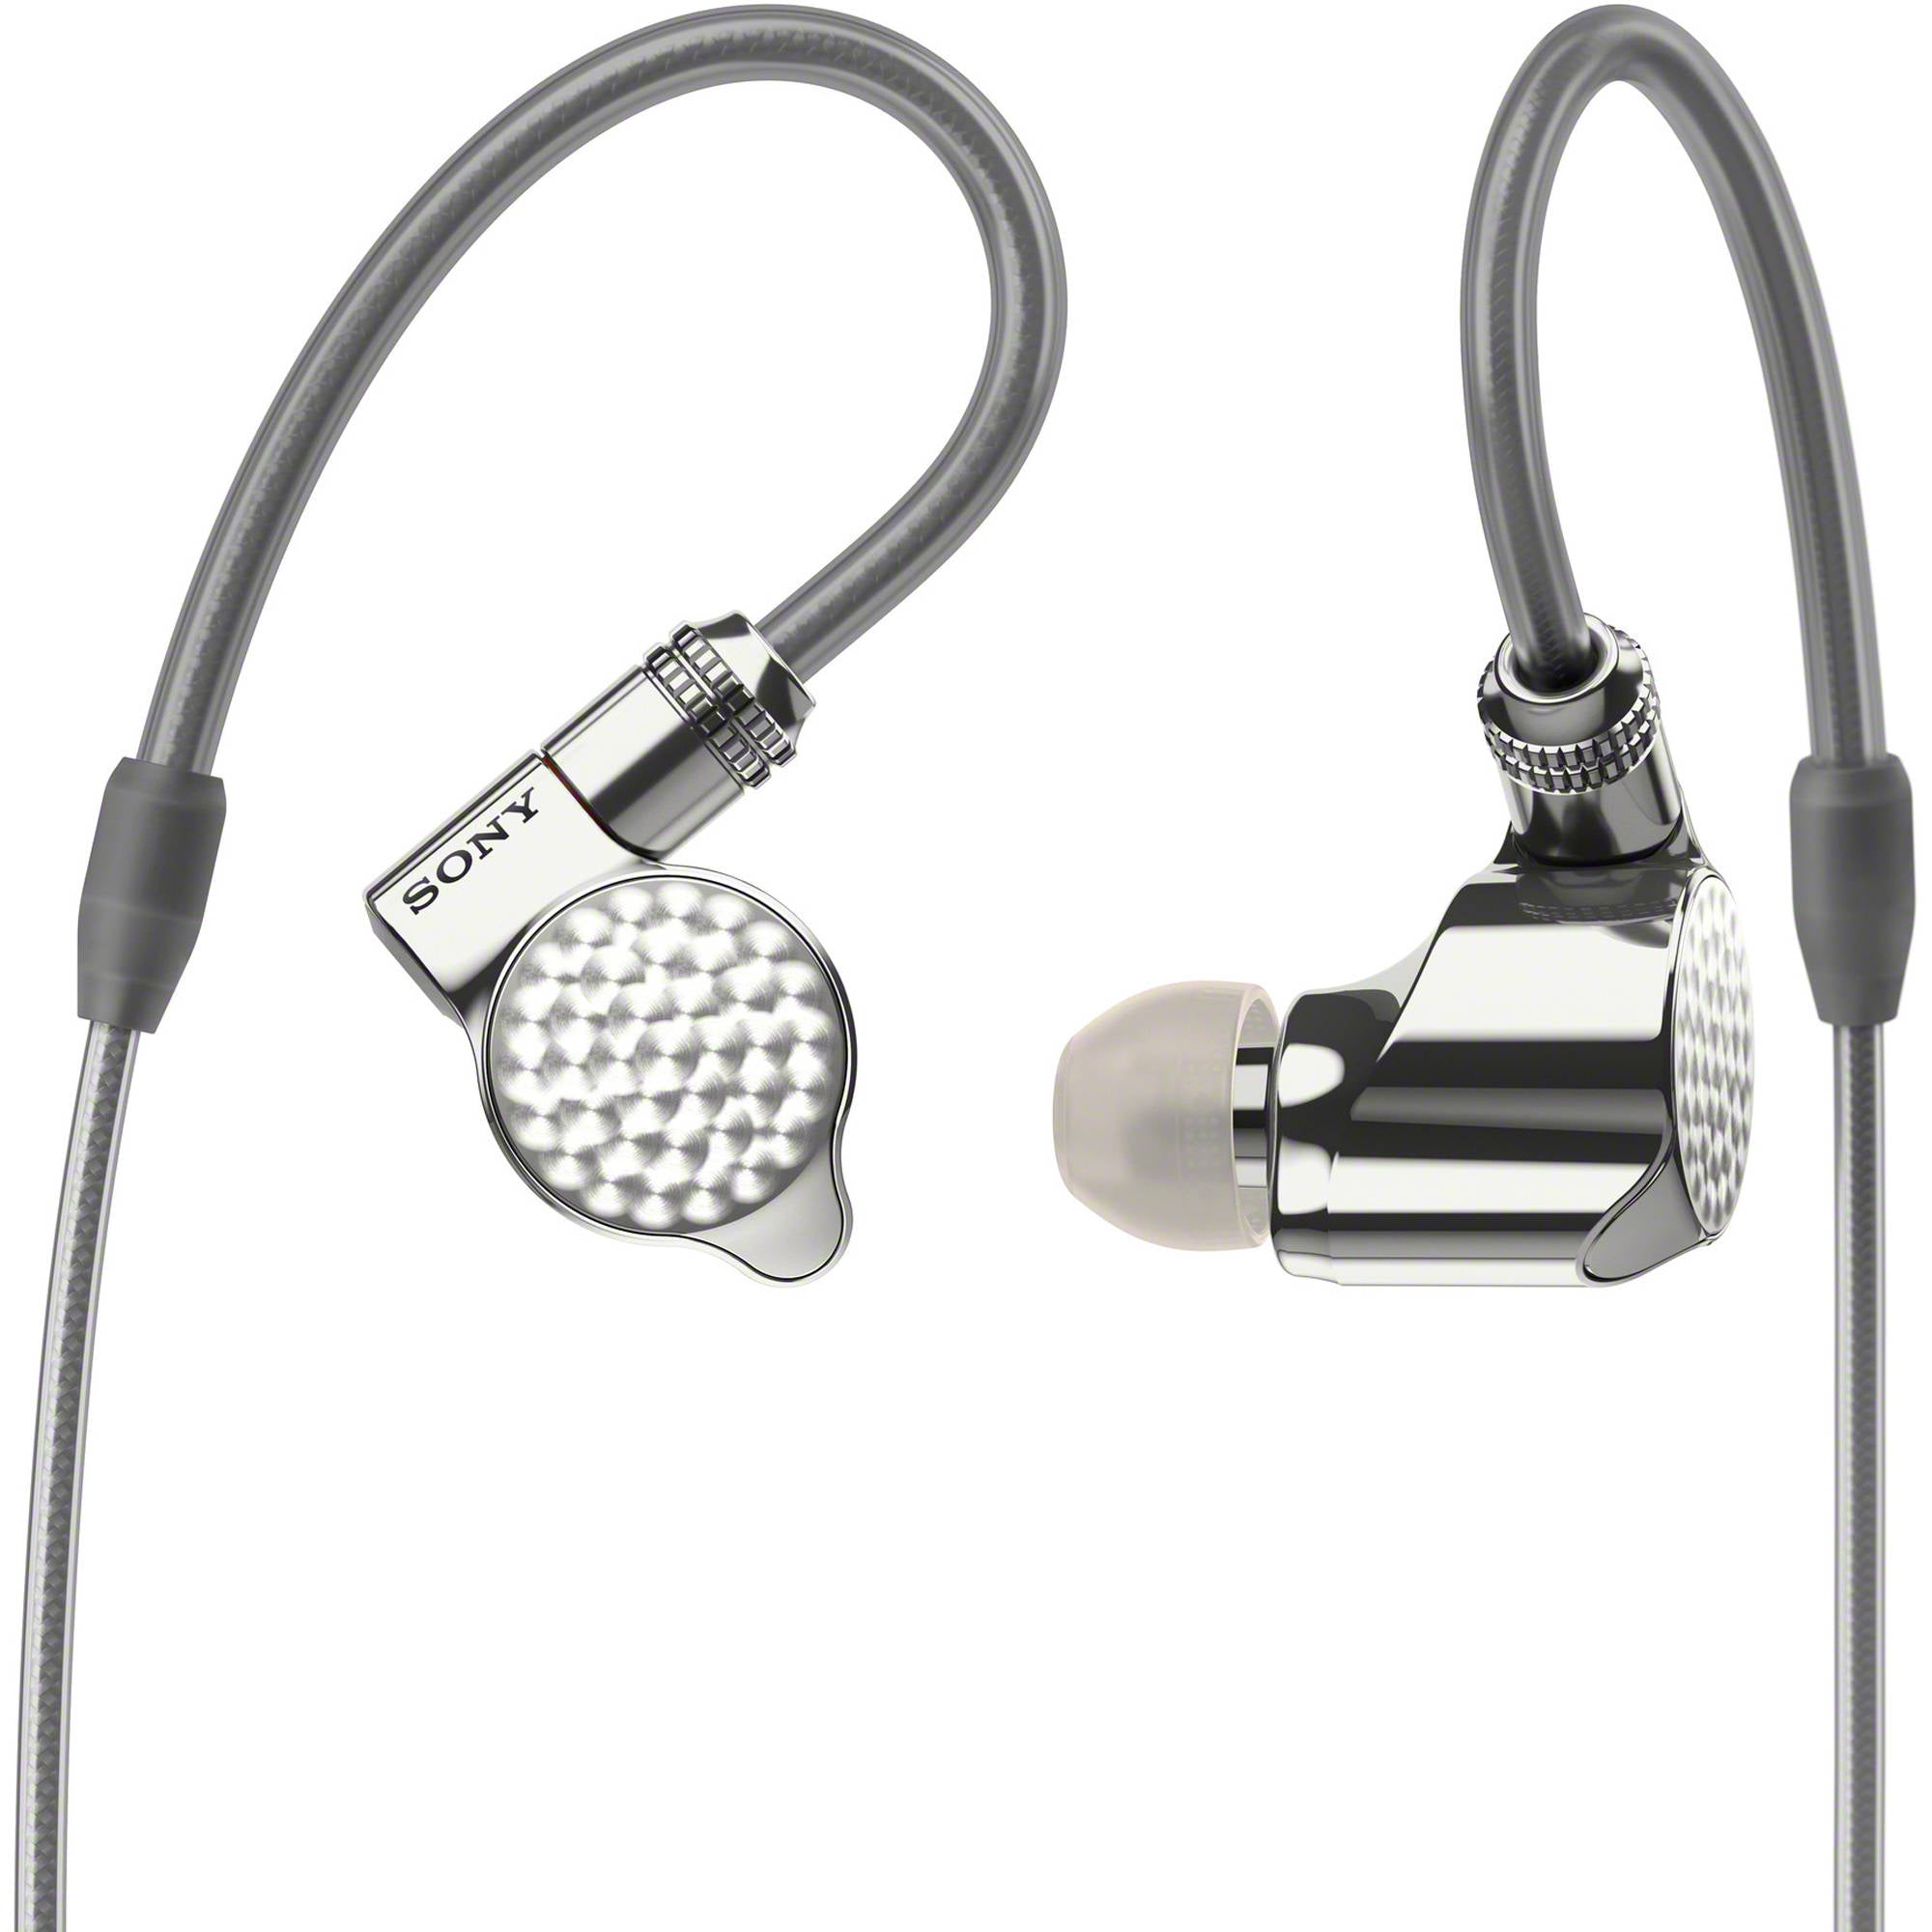 Sony Signature Series IER-Z1R - Signature Series - earphones with mic - in-ear - wired